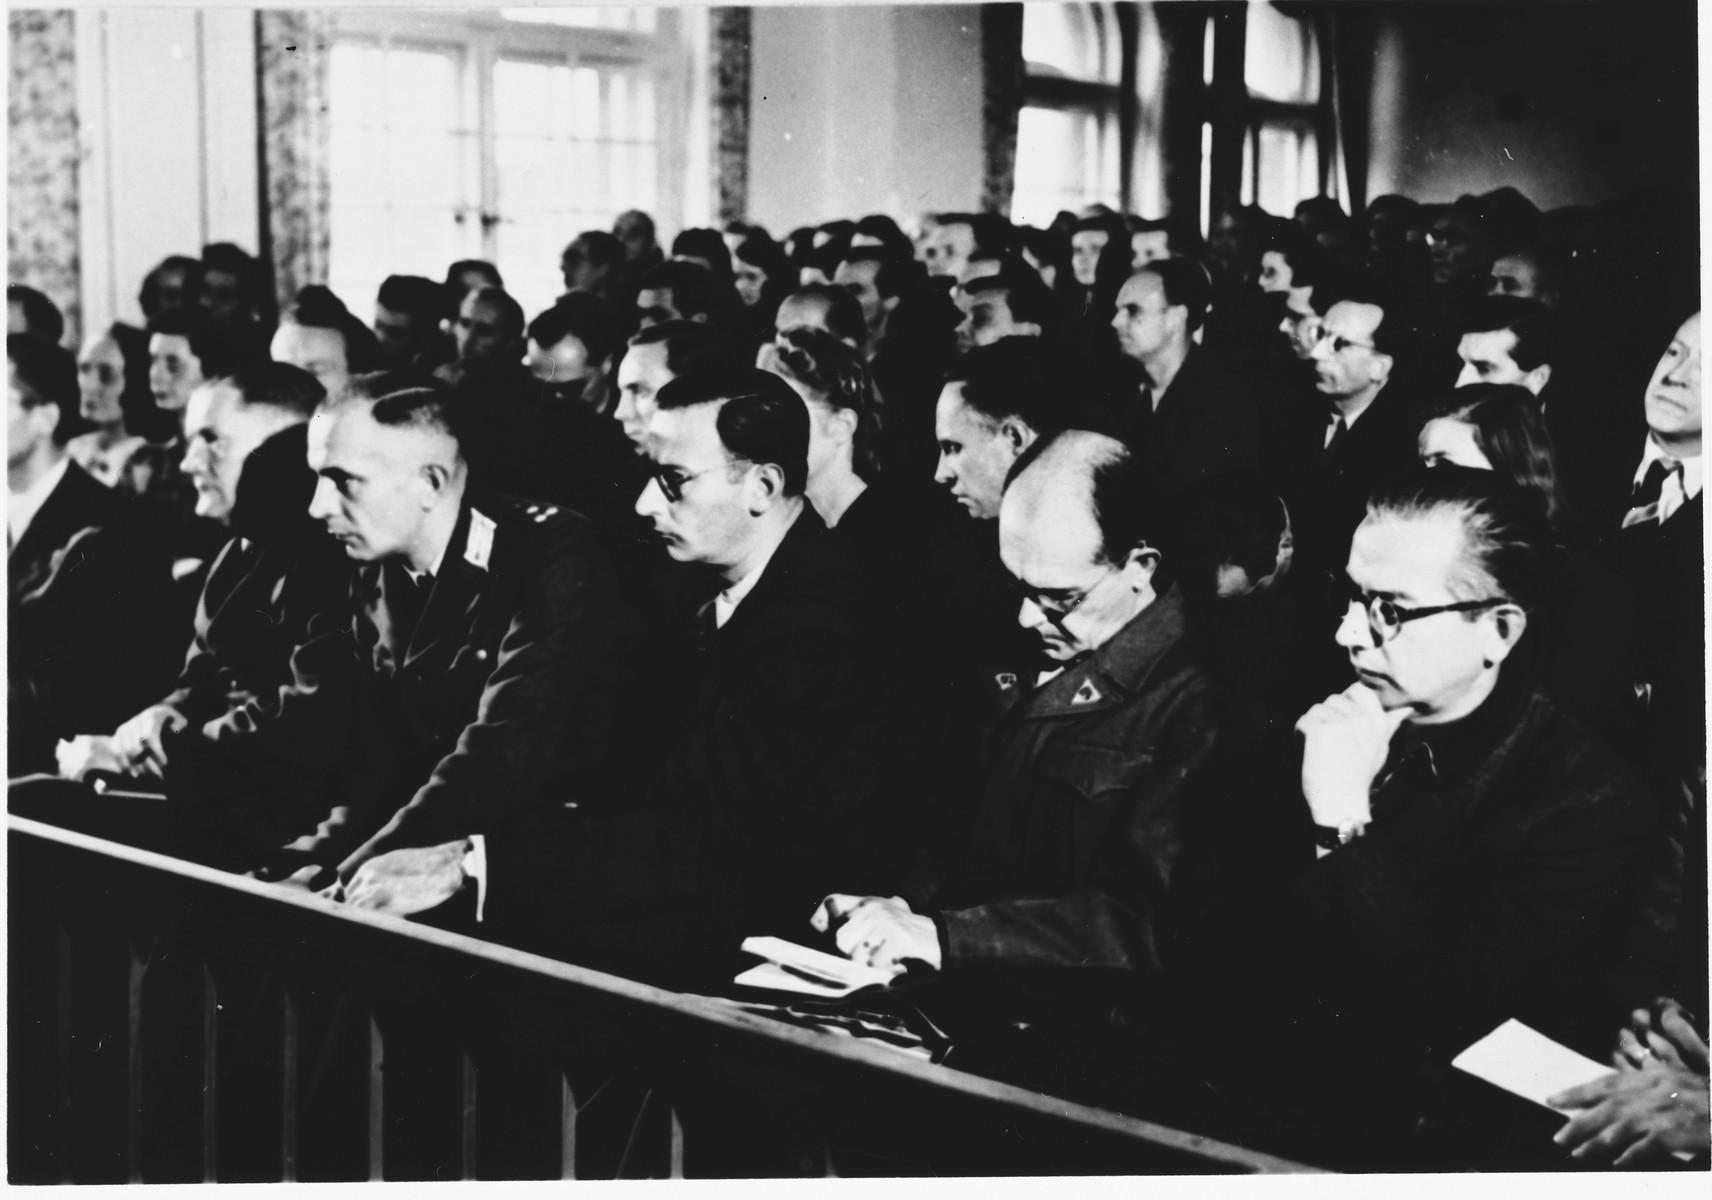 Spectators watch the proceedings at the Sachsenhausen concentration camp war crimes trial in Berlin.